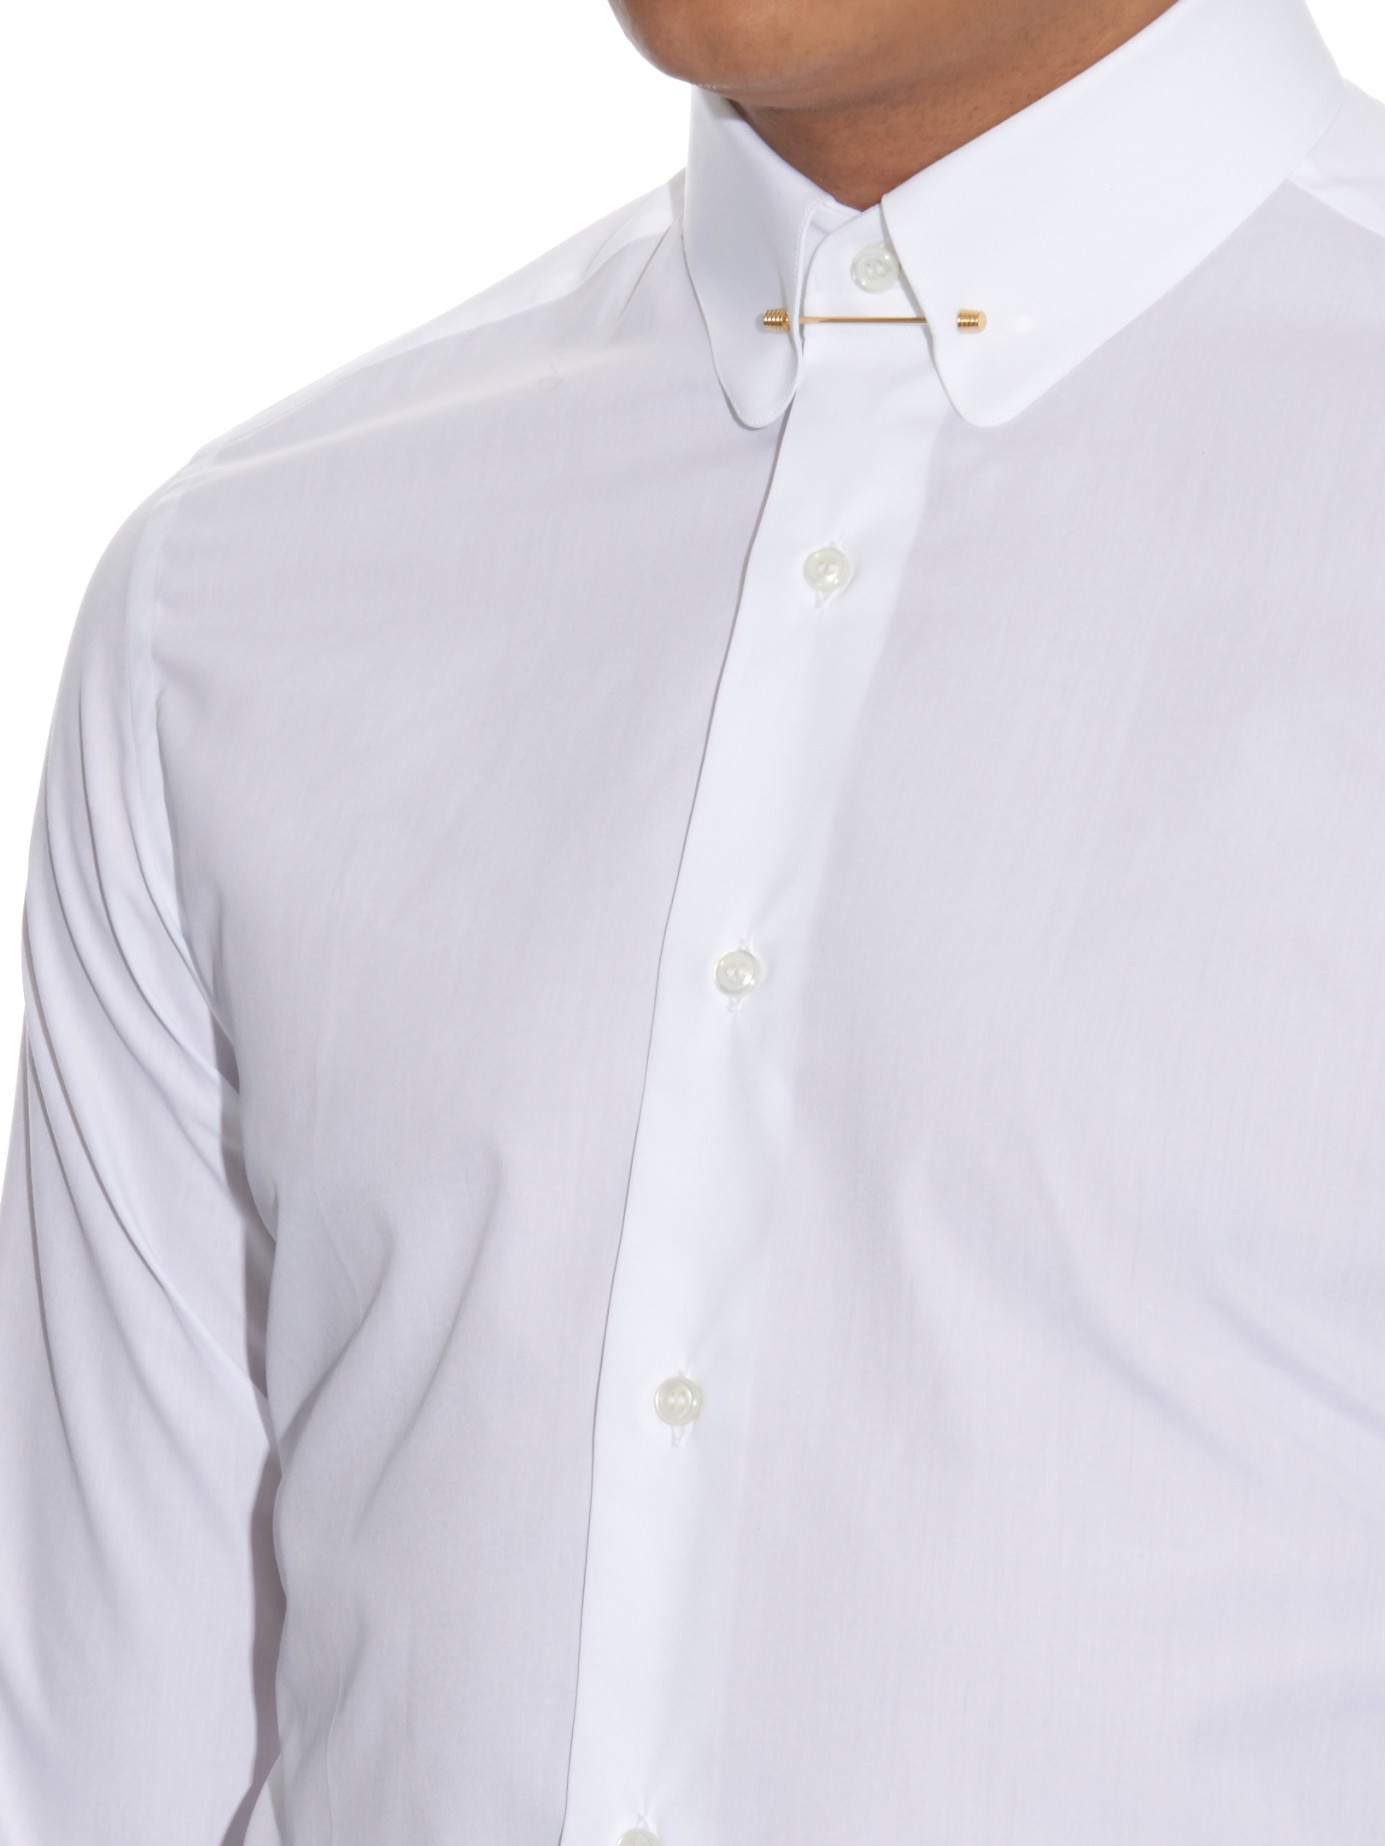 Lyst Brioni Pin Collar Slim Fit Cotton Shirt In White For Men